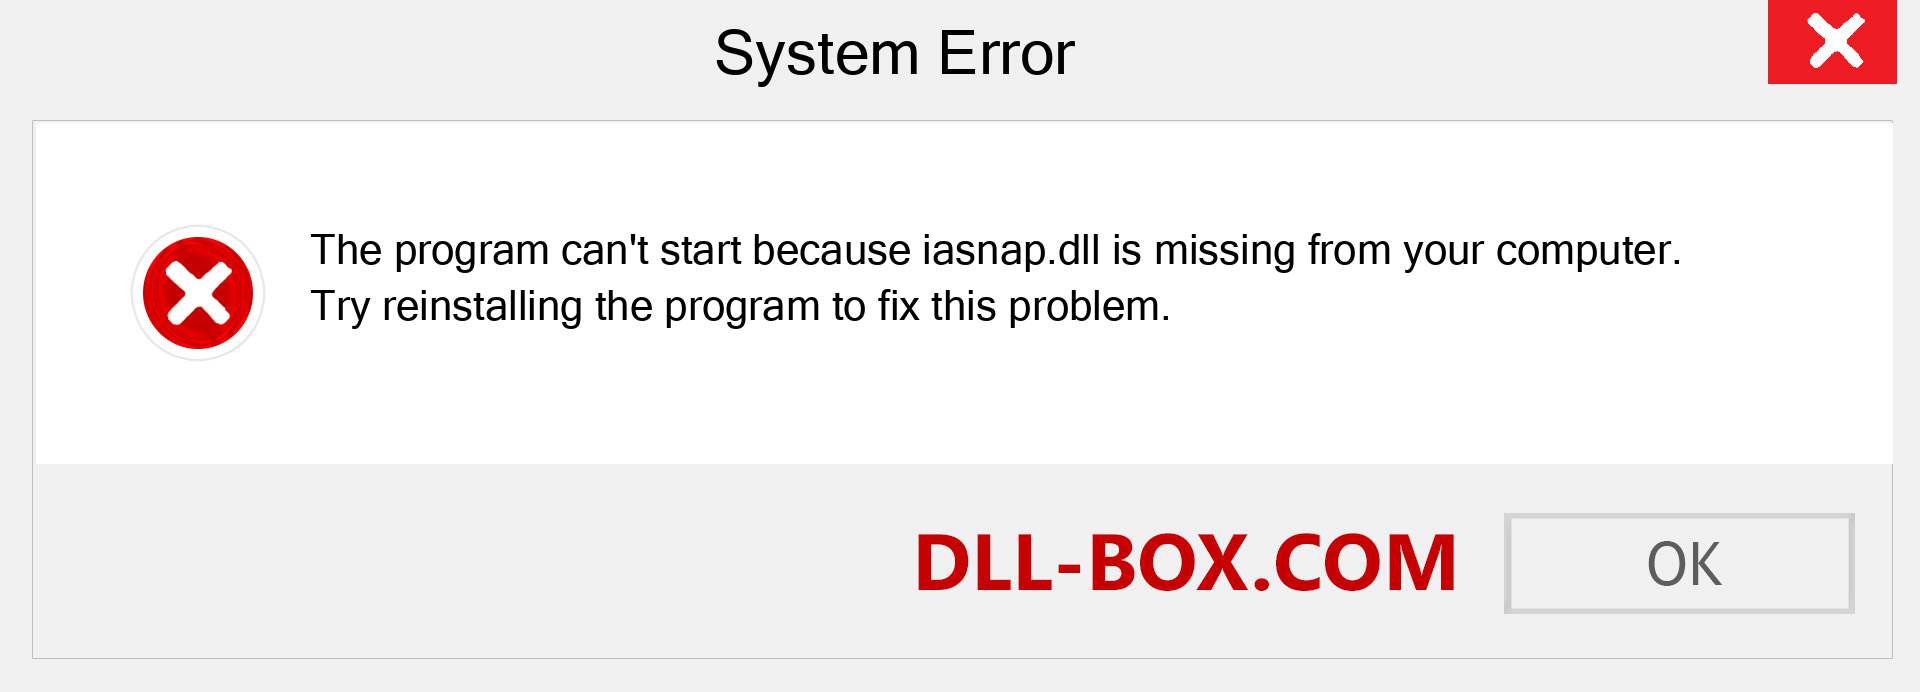  iasnap.dll file is missing?. Download for Windows 7, 8, 10 - Fix  iasnap dll Missing Error on Windows, photos, images